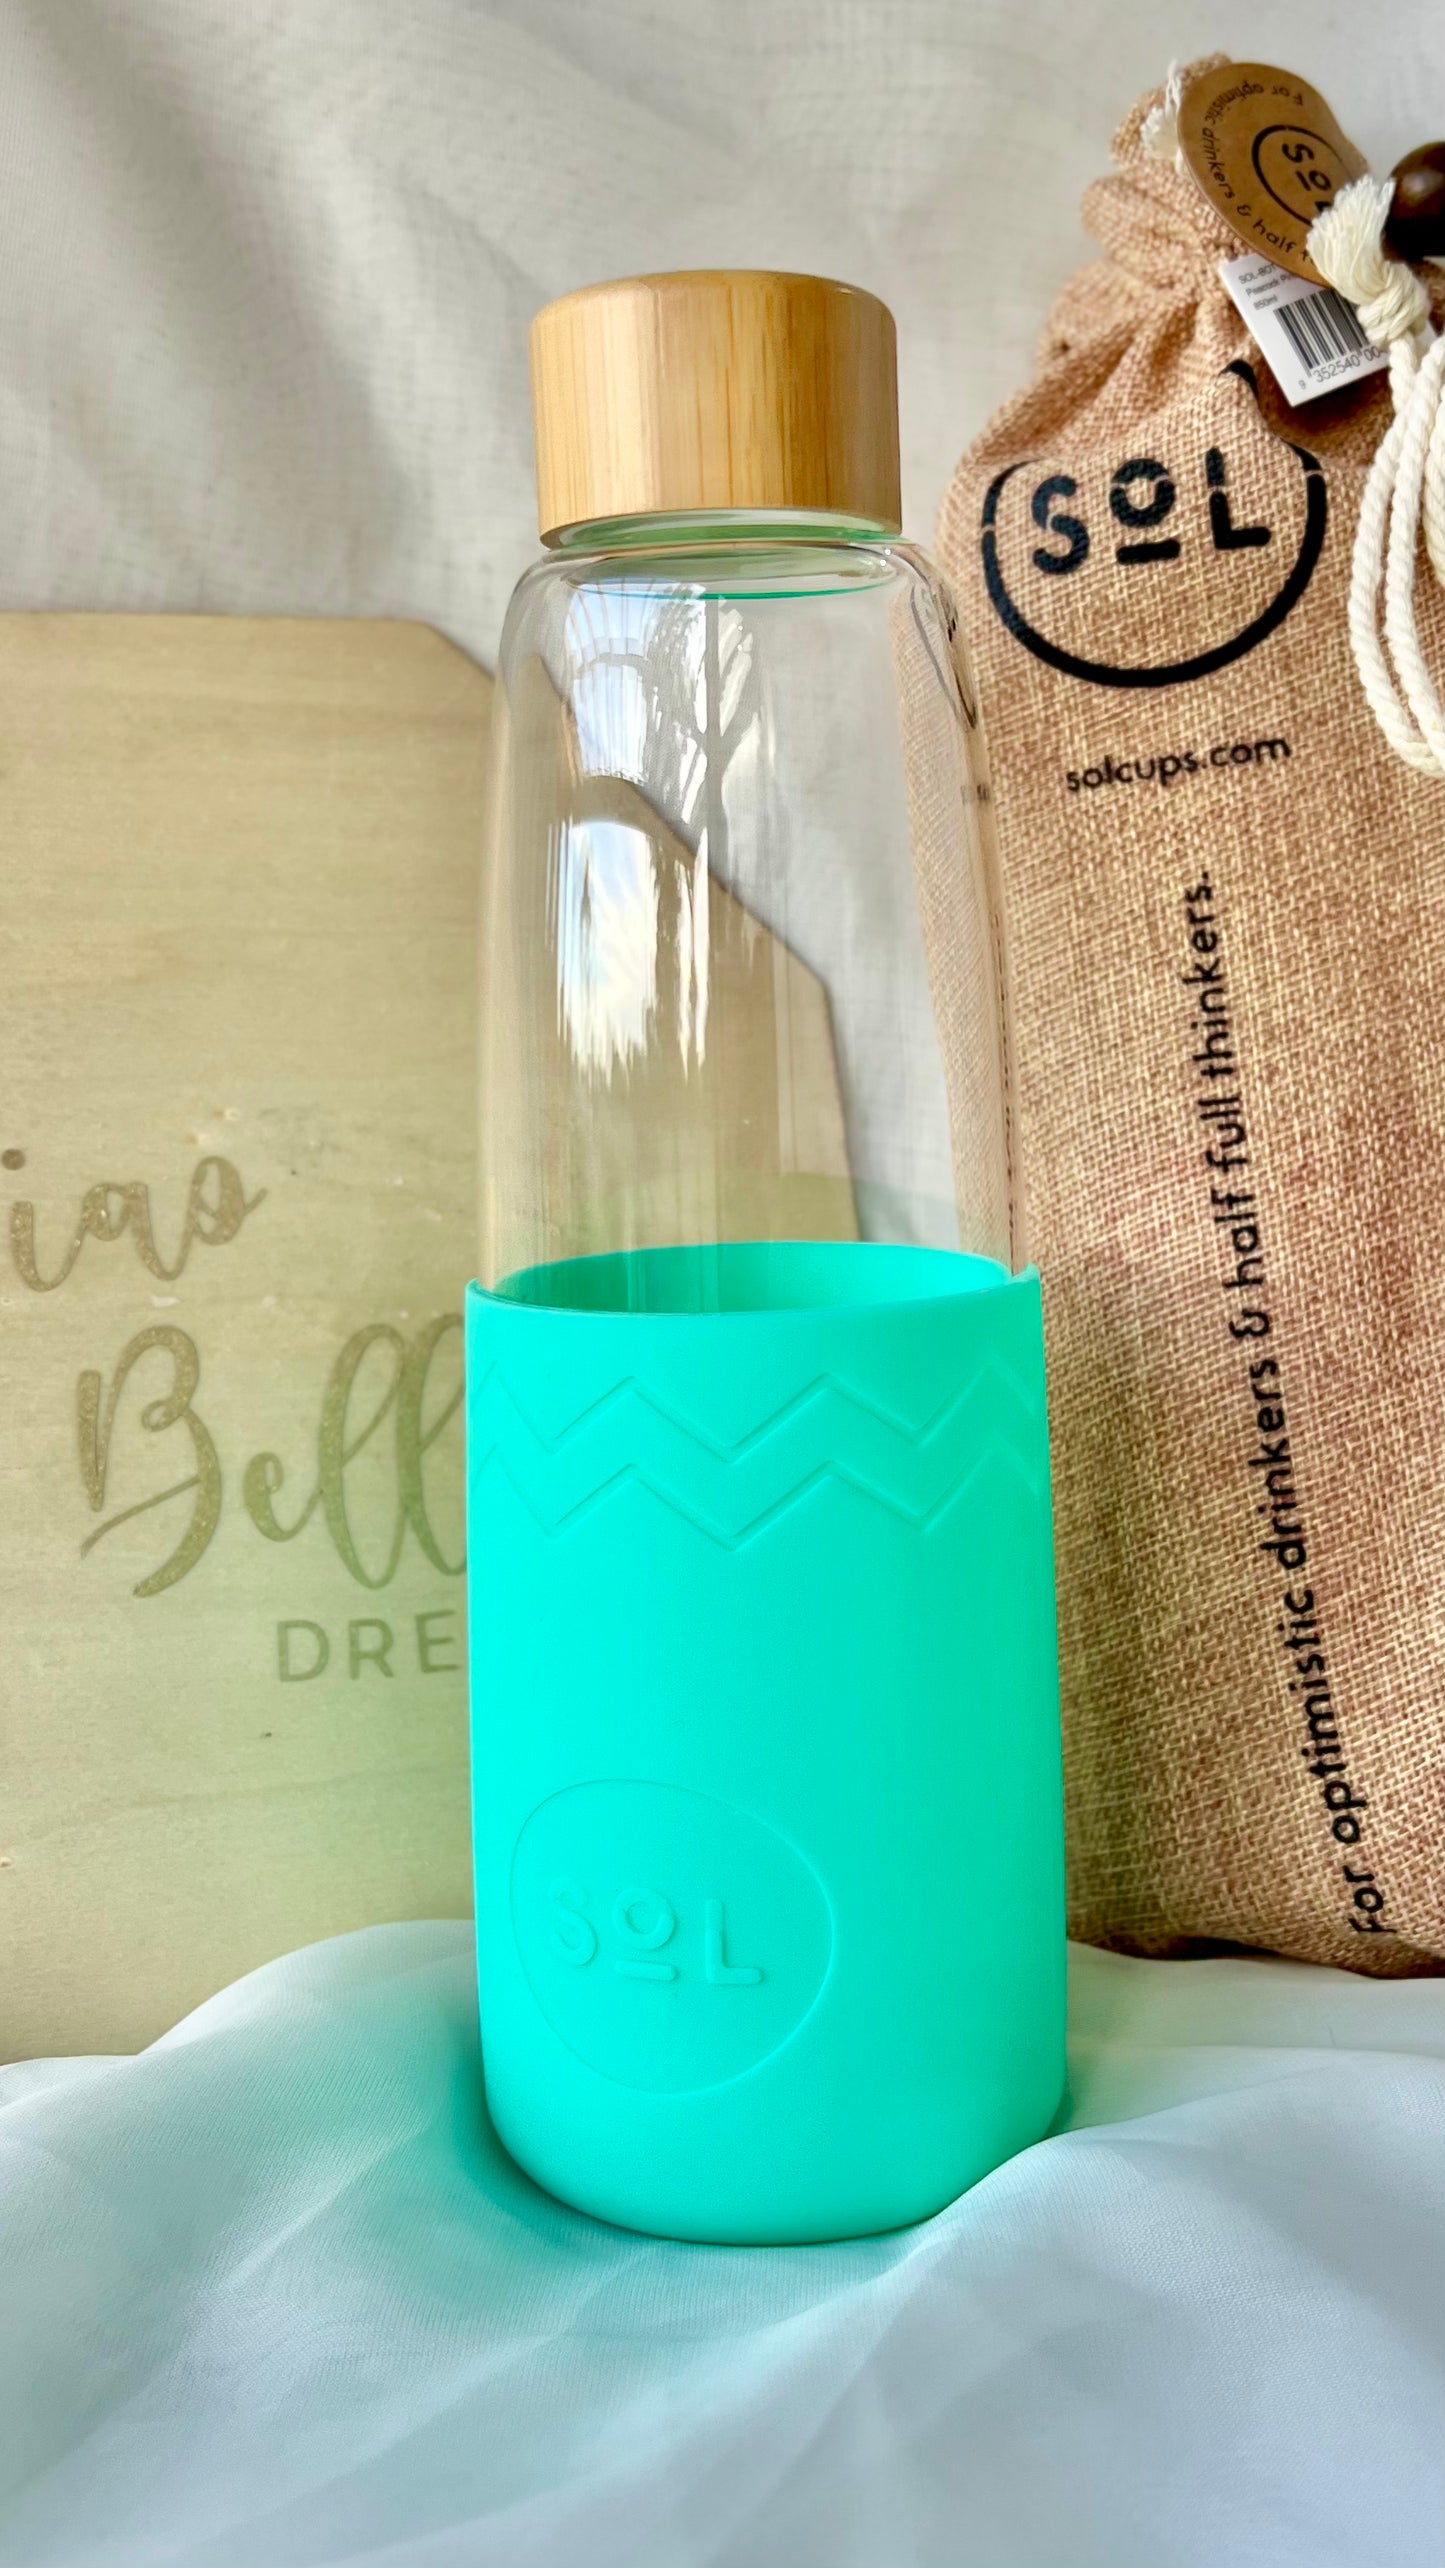 SoL Water Bottle: Enjoy the pure taste of water in a hand blown glass bottle that's reusable, easy to carry and comes in a range of sizes and colours.
Our Large beautiful SoL Bottles  - Ciao Bella Dresses 